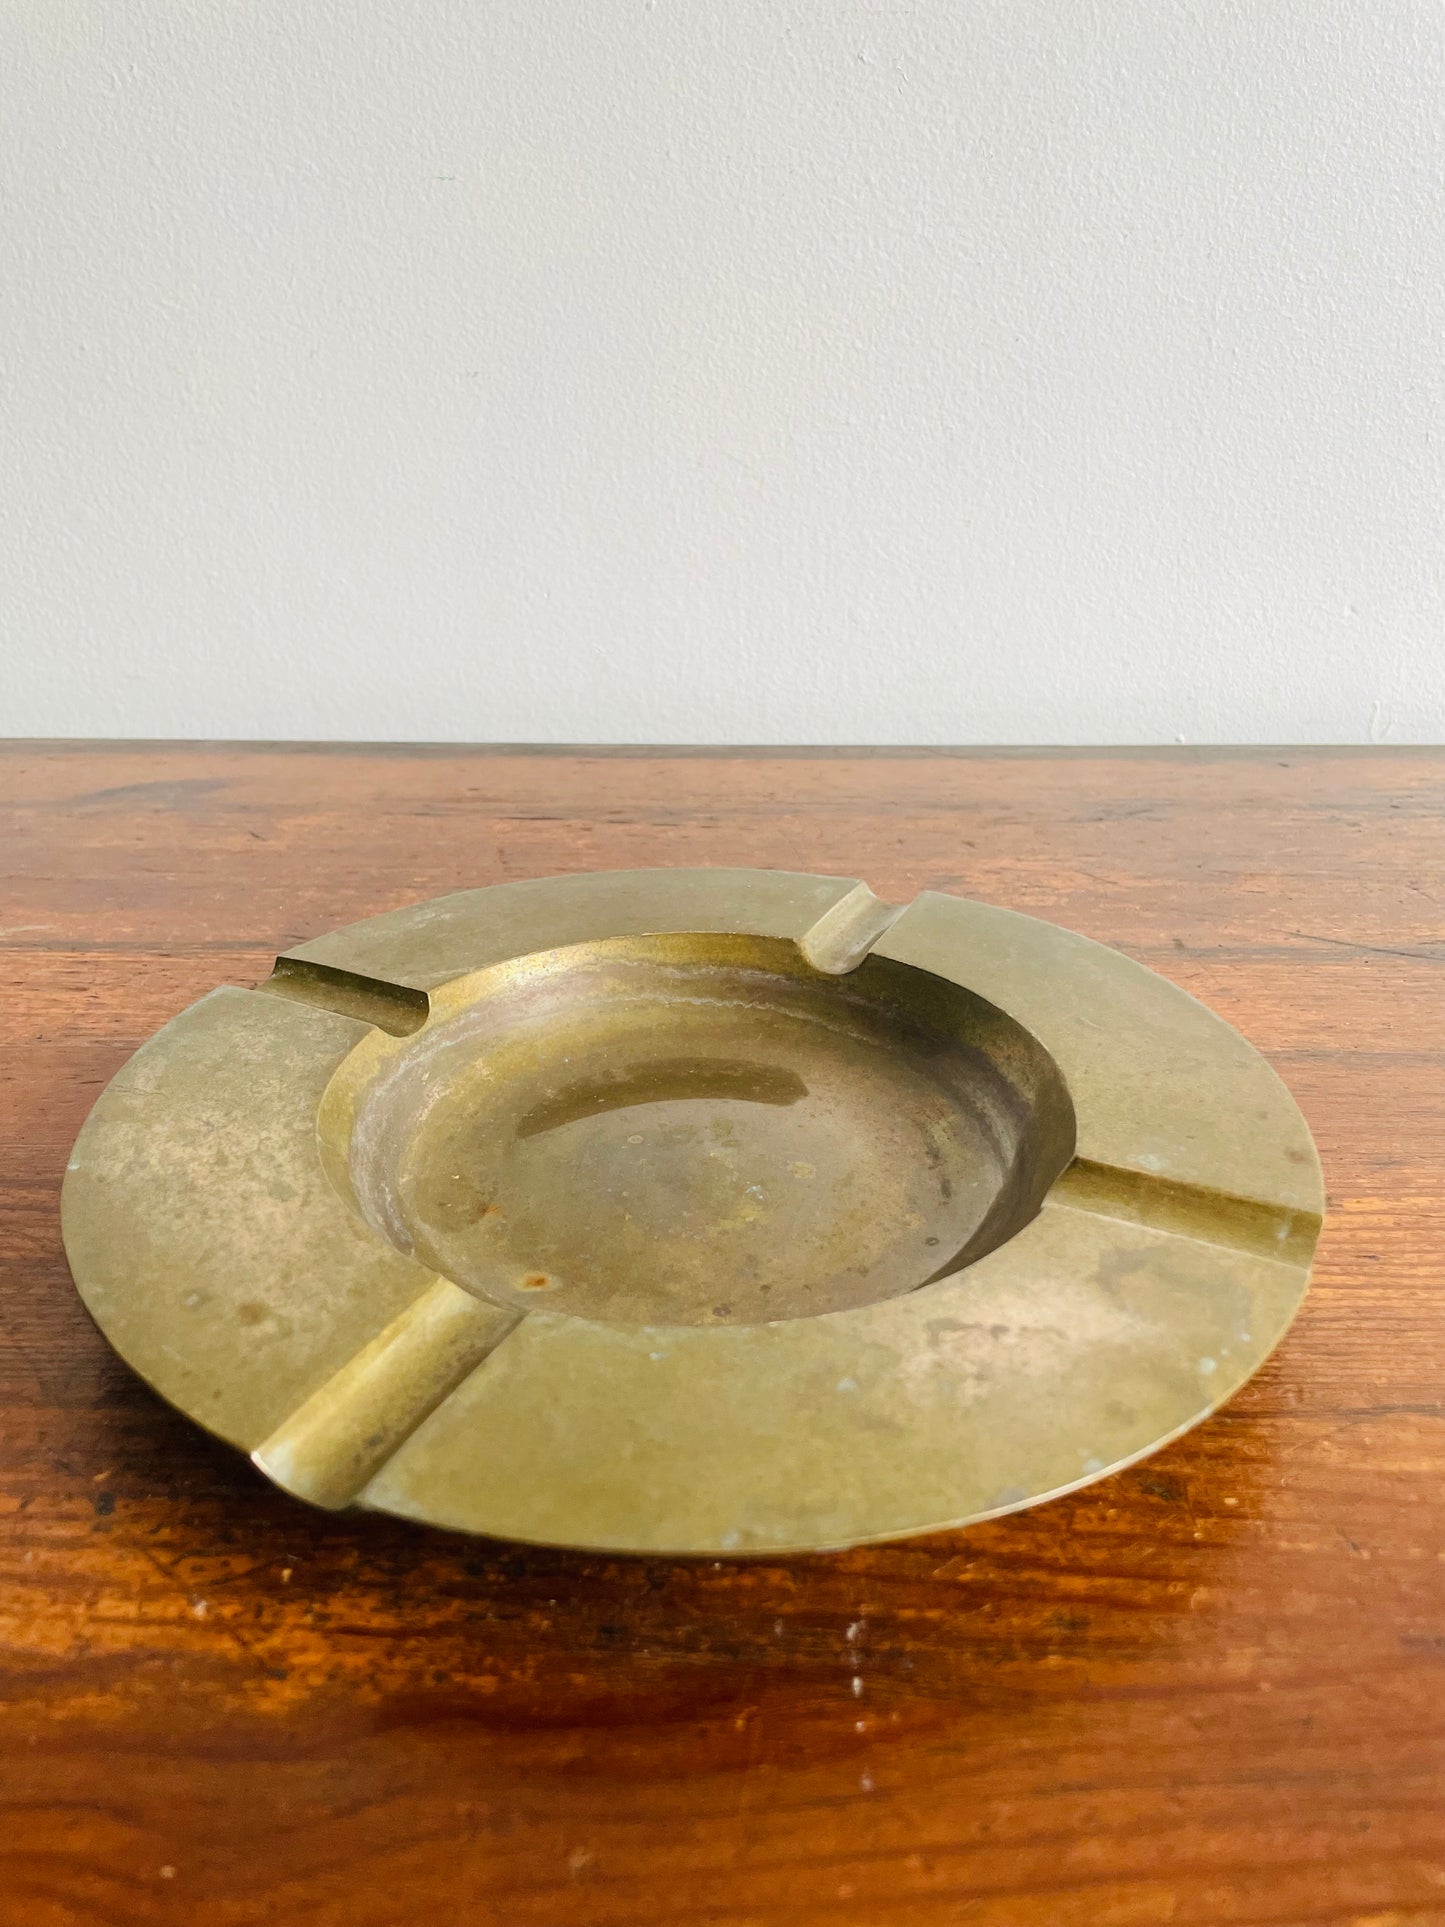 Large Solid Brass Ashtray Catchall Dish # 1 - Also Great for Incense, Sage, Palo Santo, Etc.!